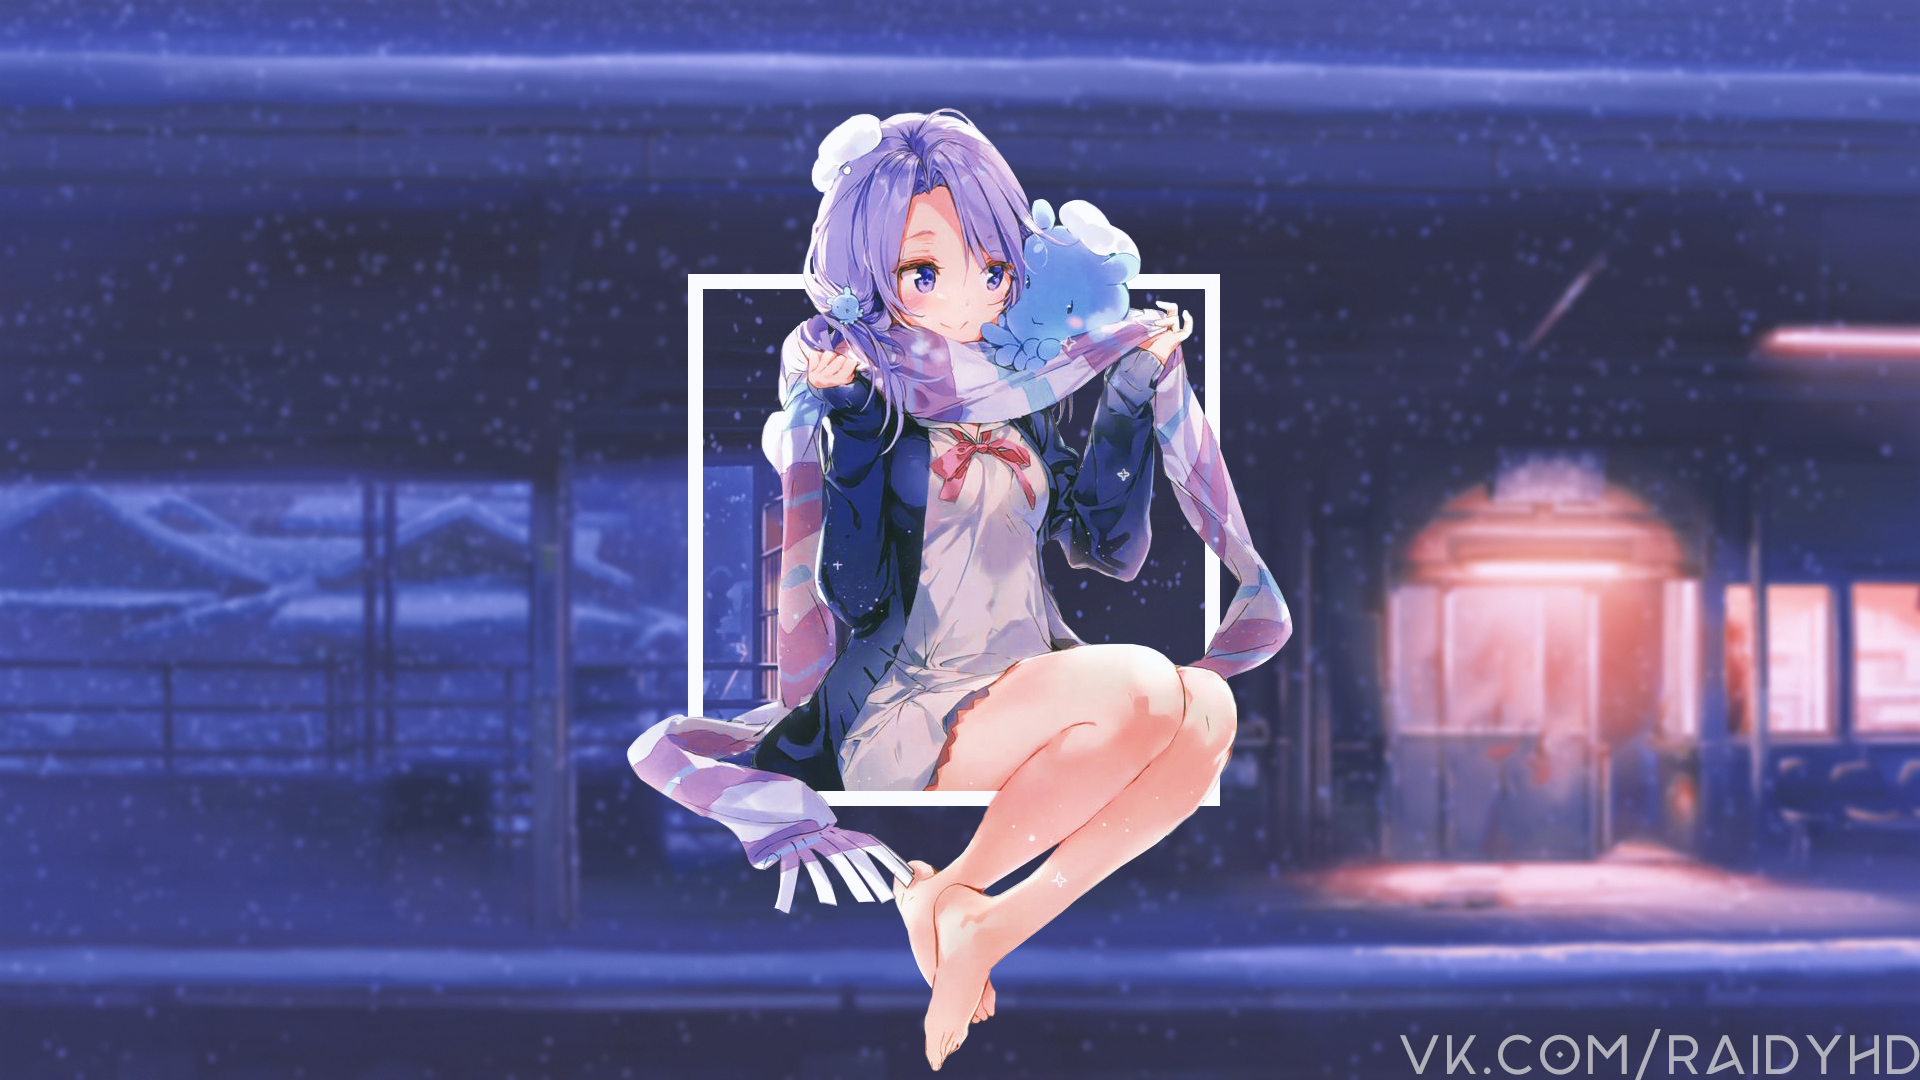 Anime 1920x1080 anime girls picture-in-picture anime watermarked